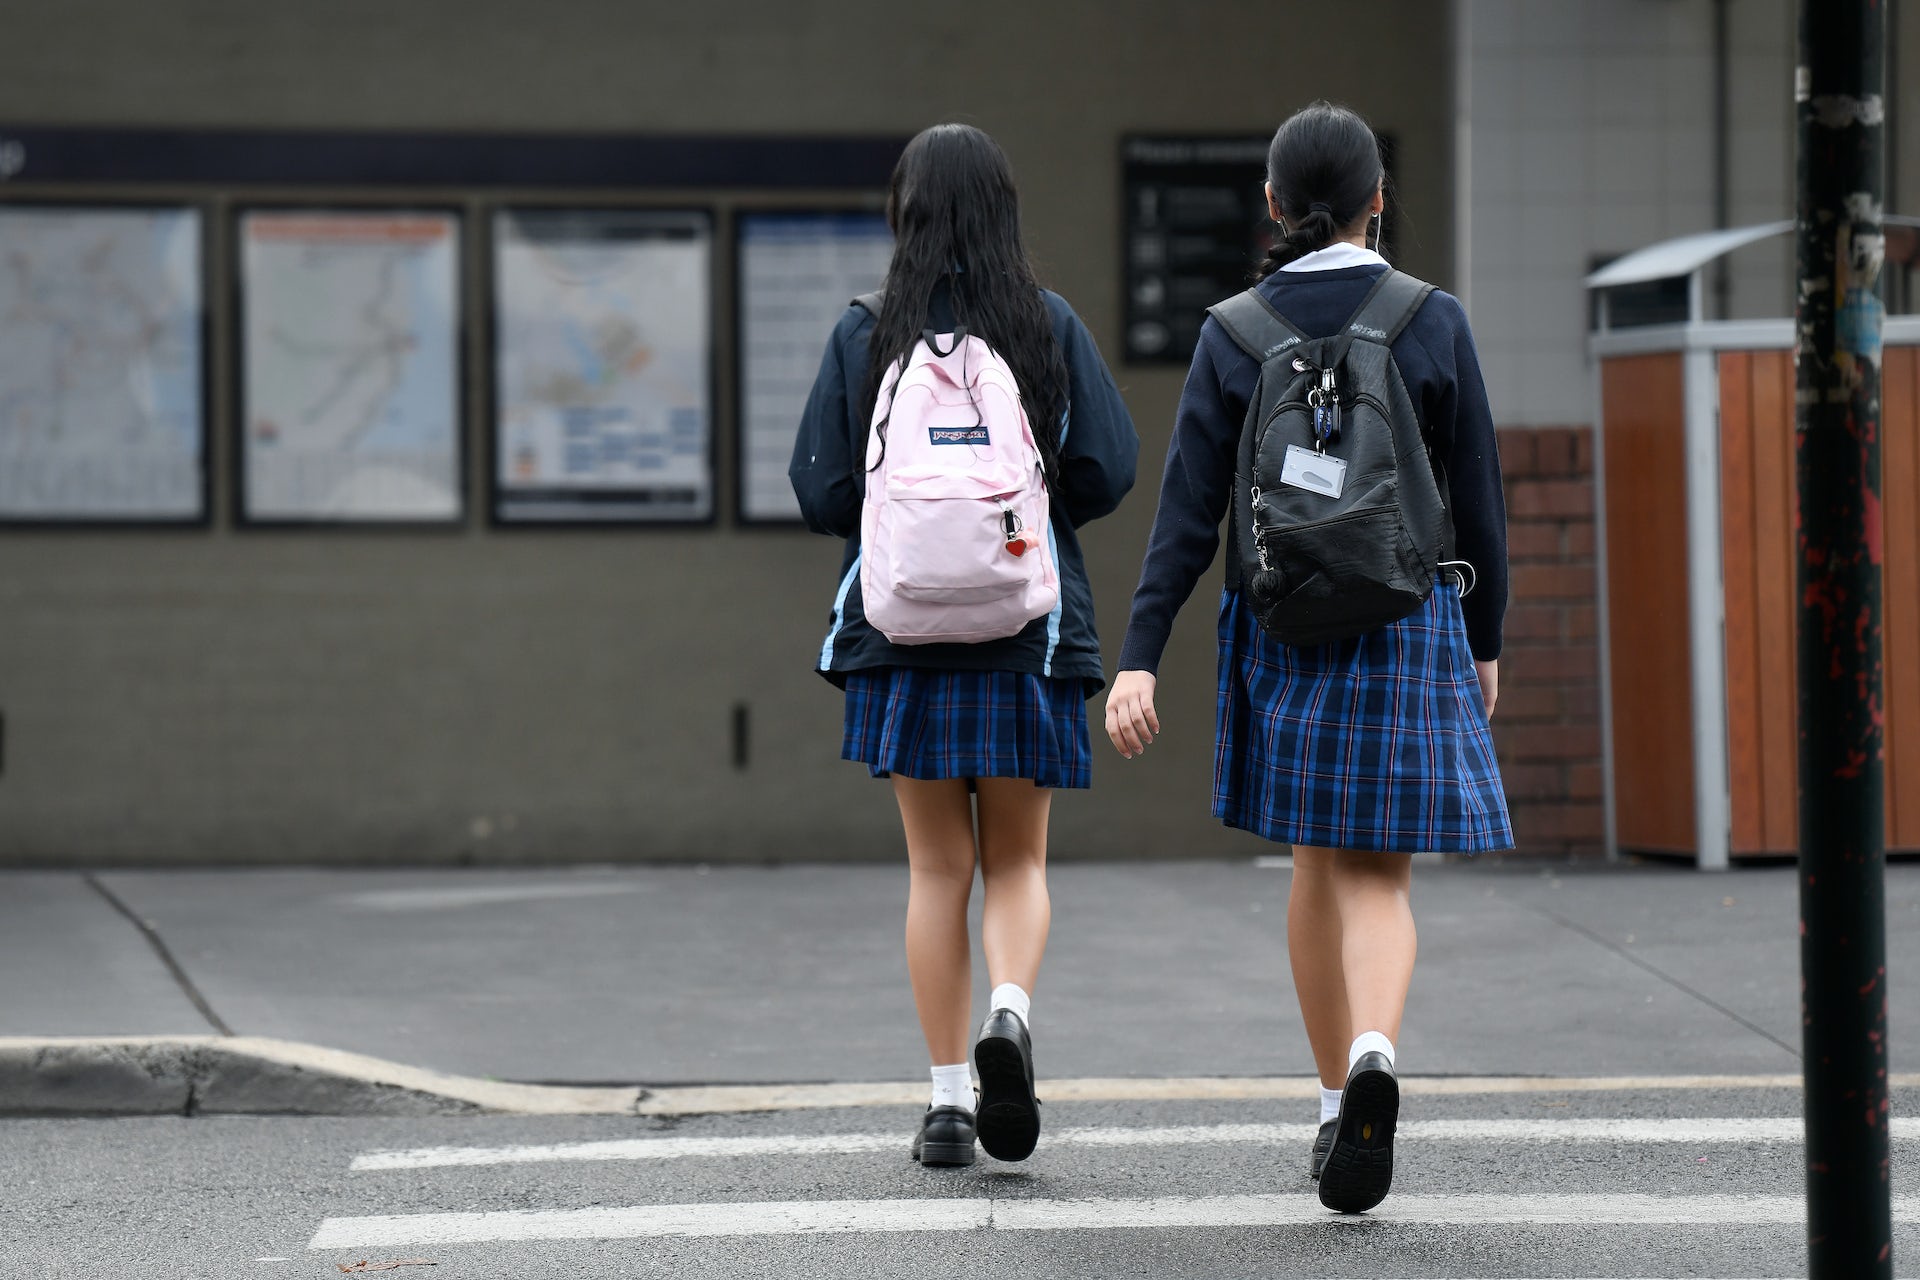 'I started walking the long way': many young women first experience street harassment in their school uniforms